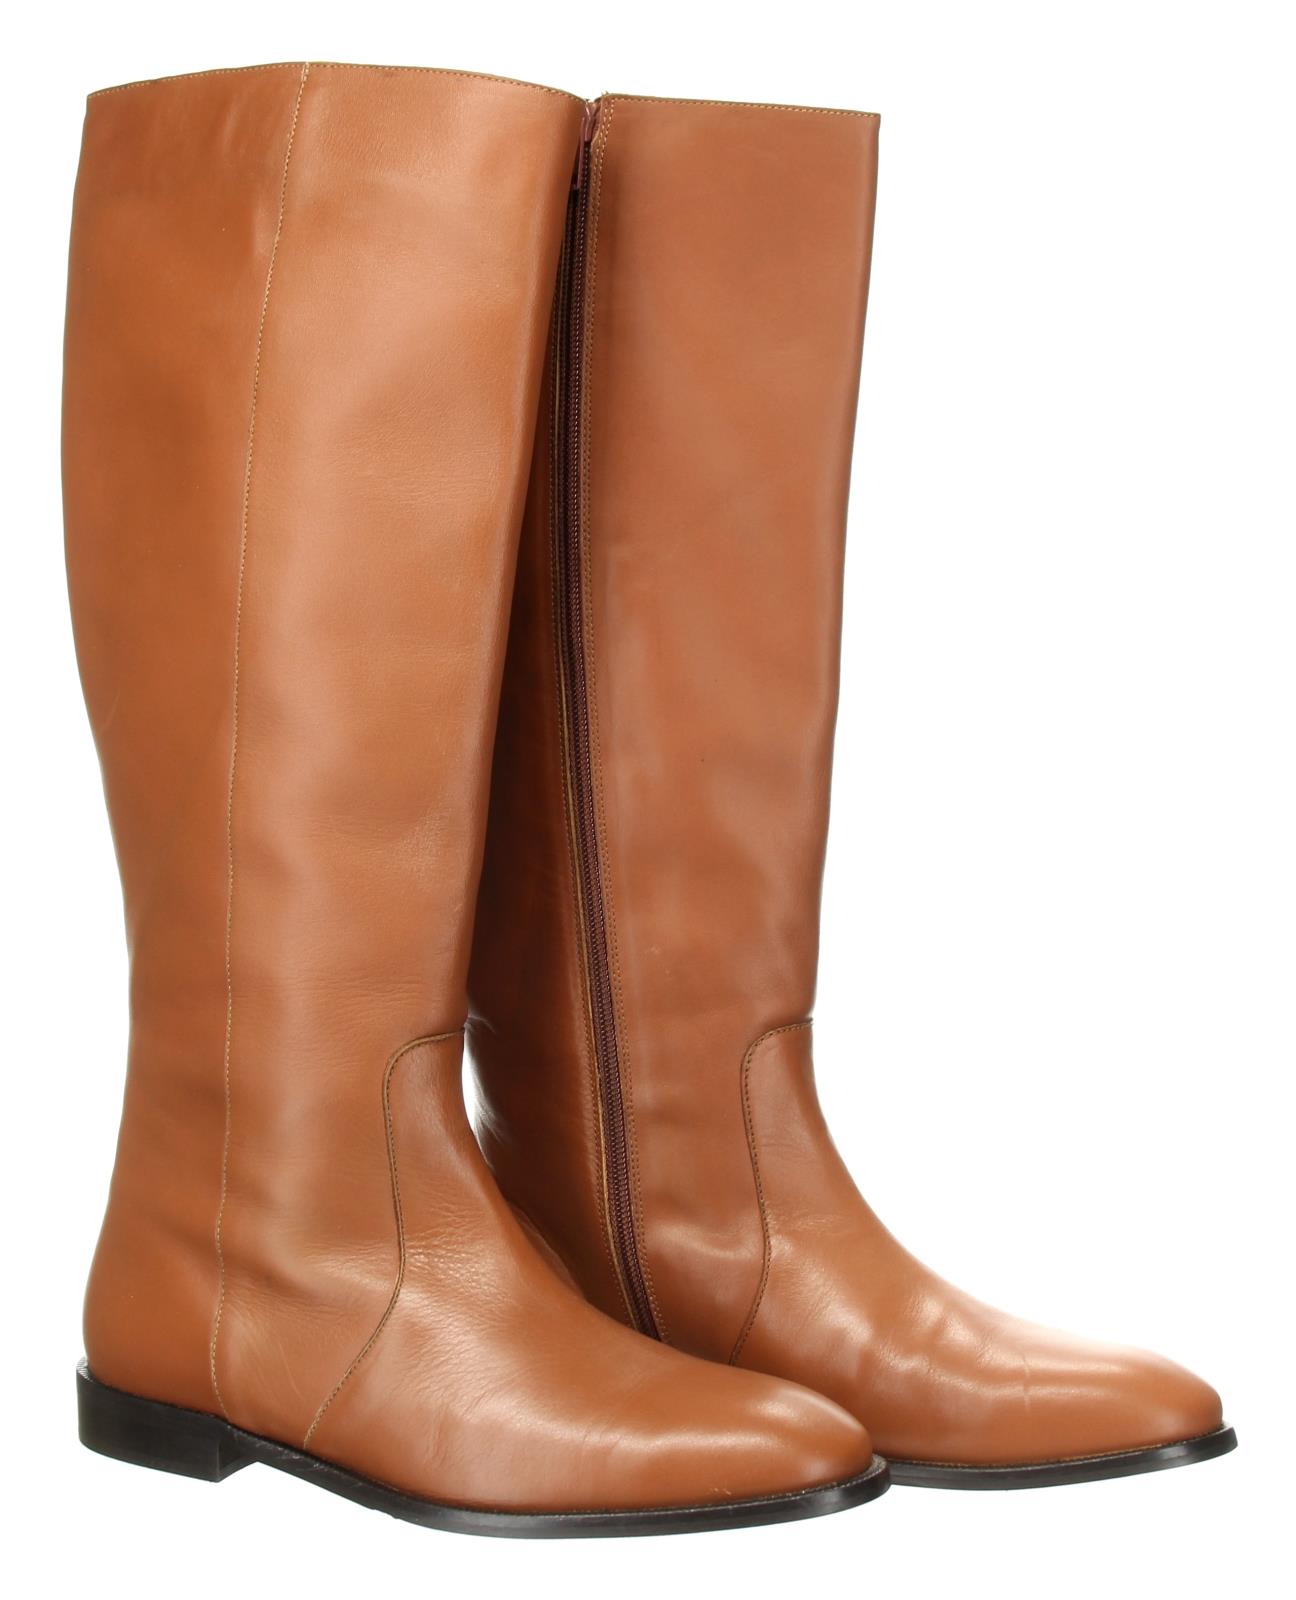 J Crew Women's Leather Riding Boot with 